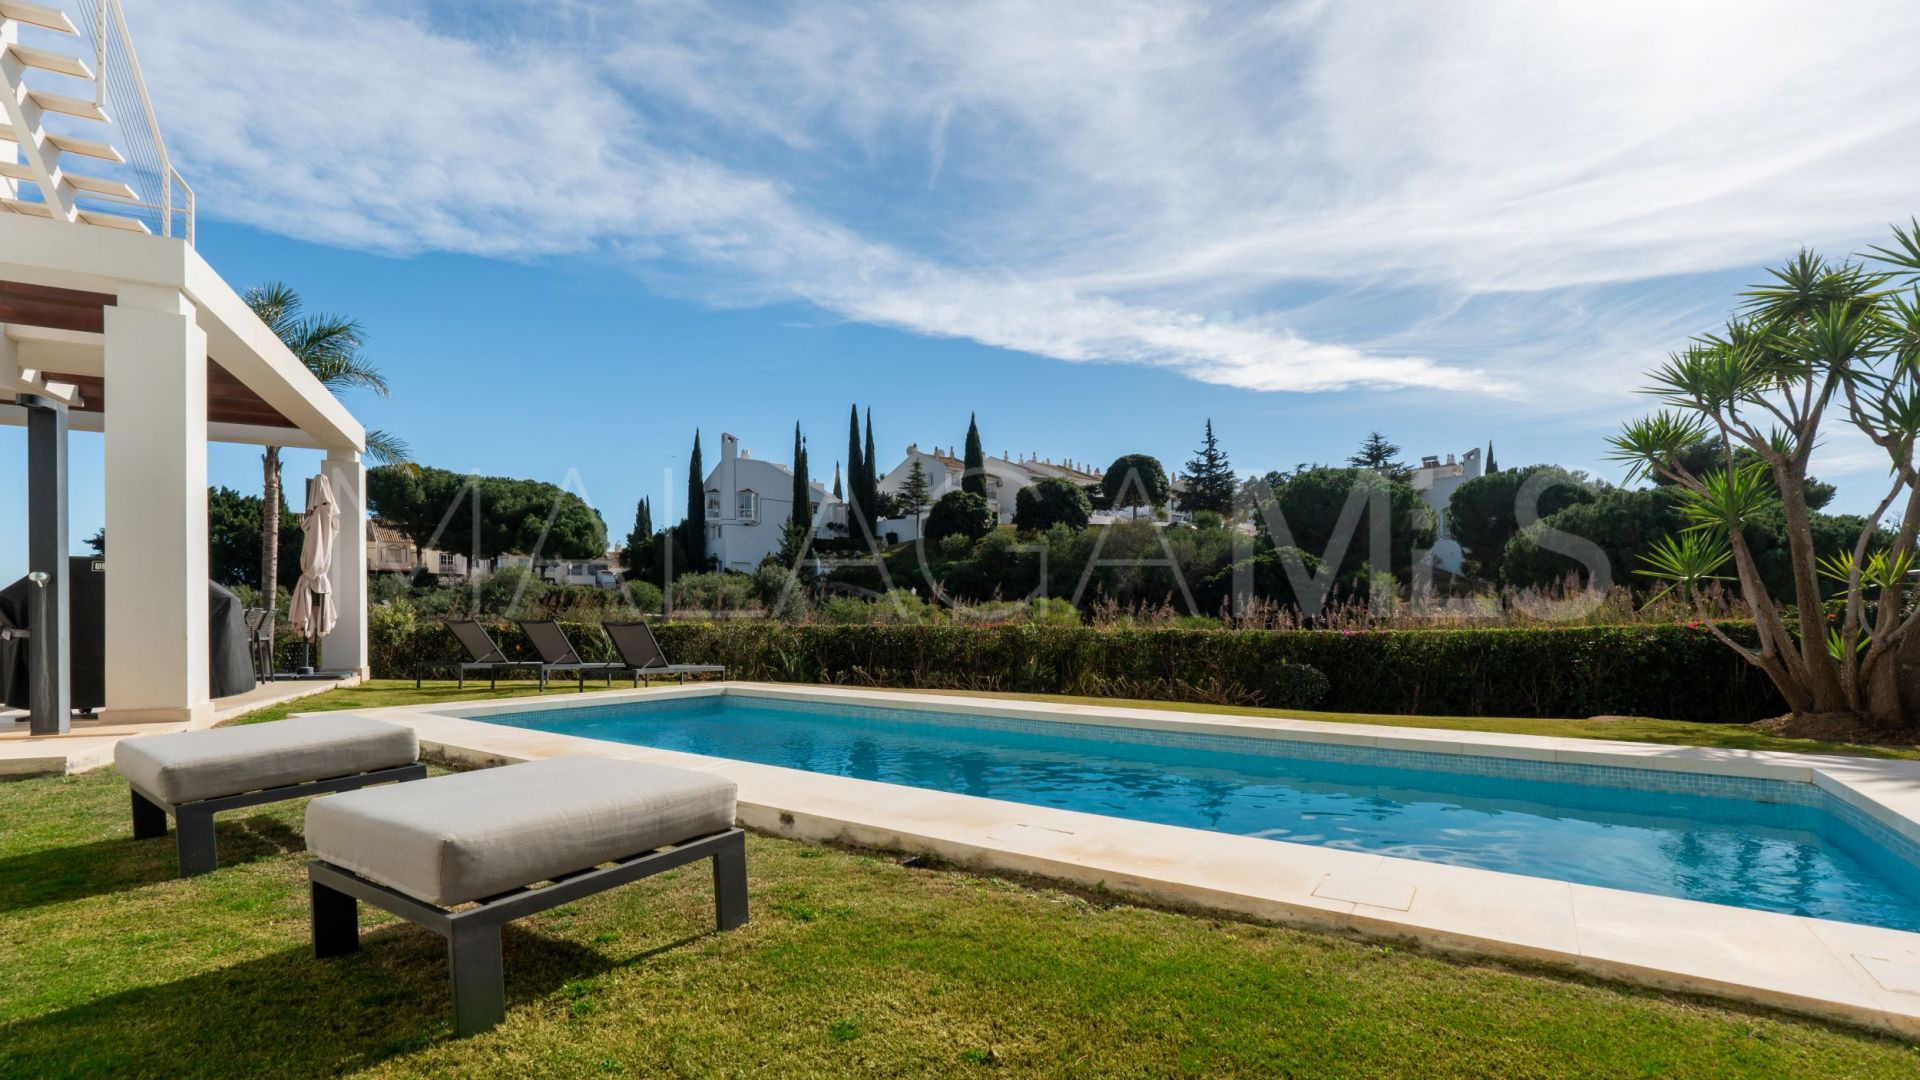 Cabopino, villa pareada for sale with 5 bedrooms